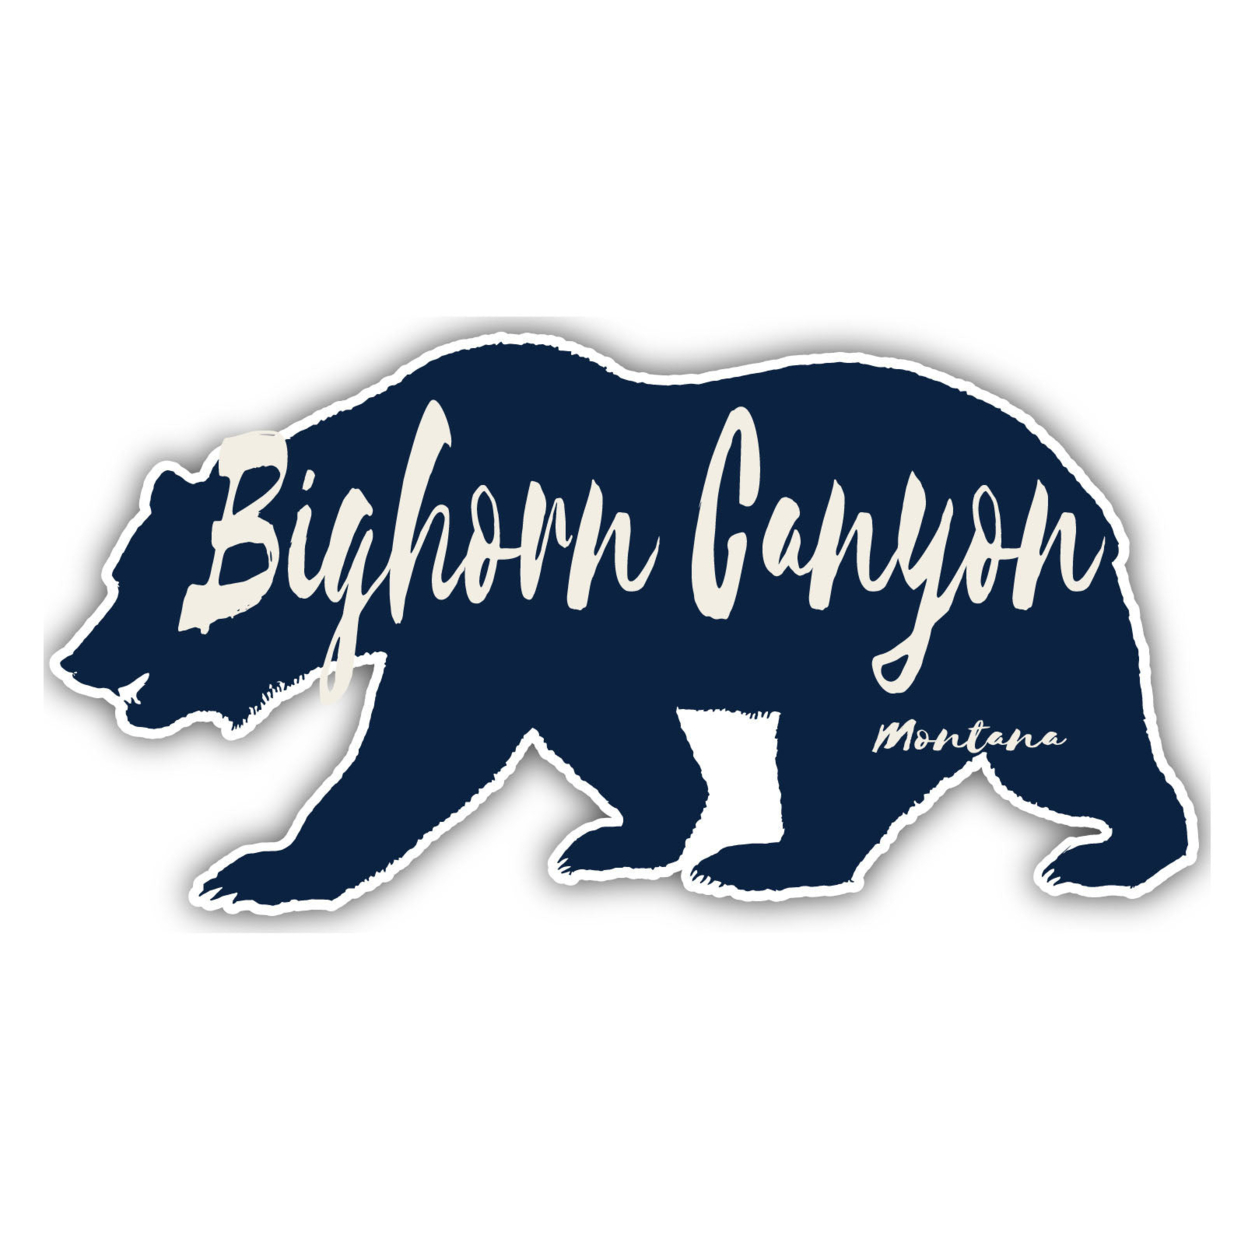 Bighorn Canyon Montana Souvenir Decorative Stickers (Choose Theme And Size) - 4-Pack, 4-Inch, Bear